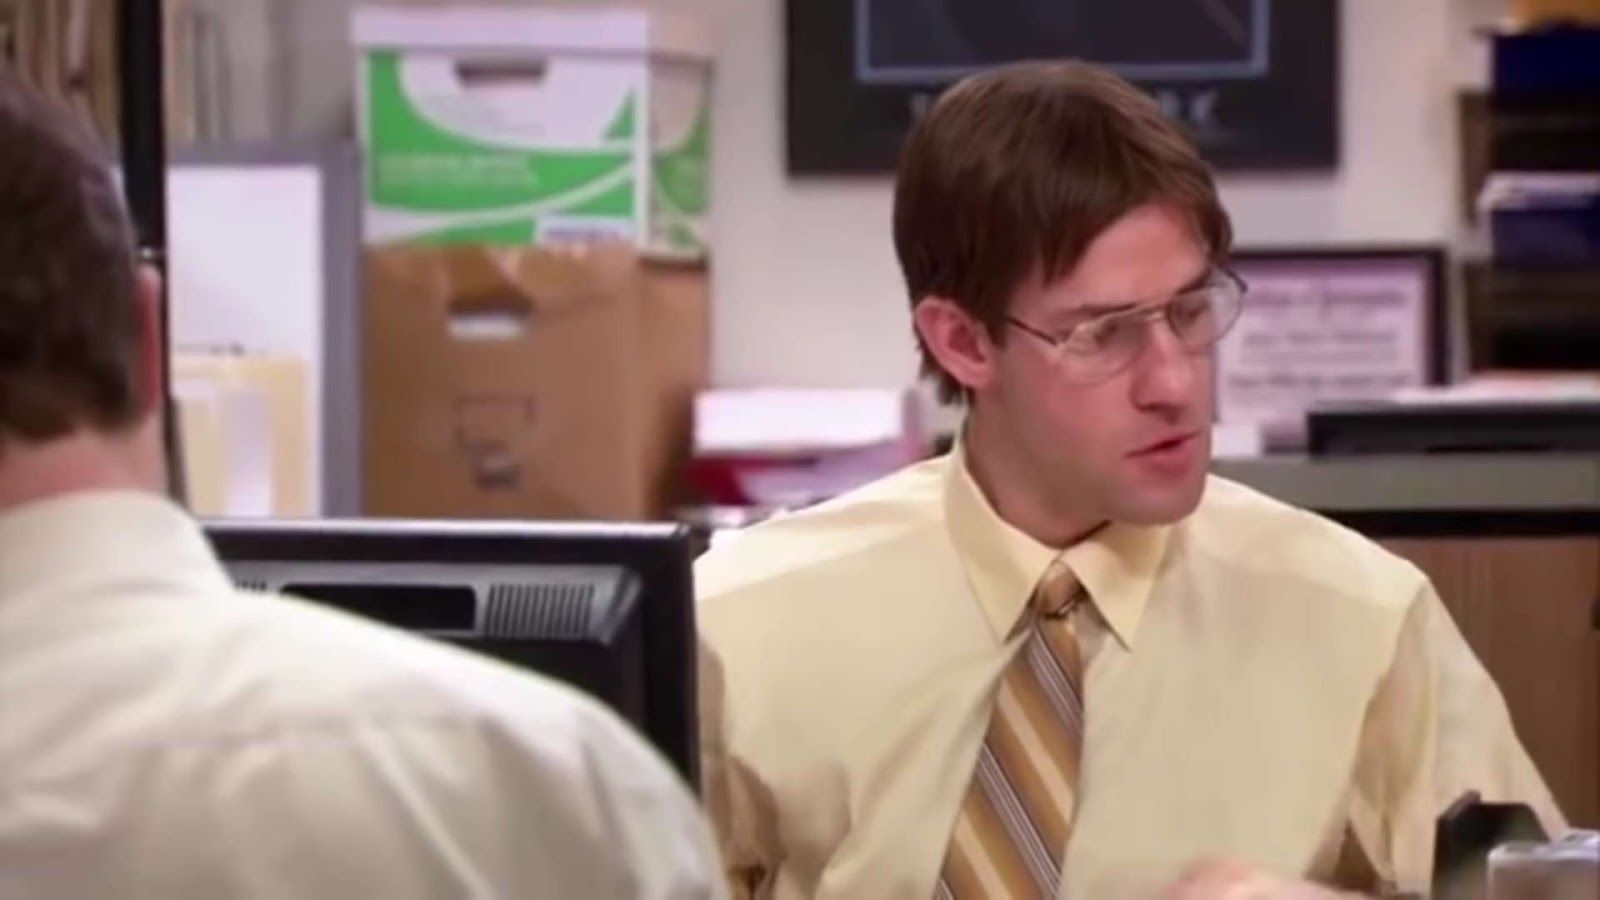 The 8 Funniest Office Episodes You Can’t Miss